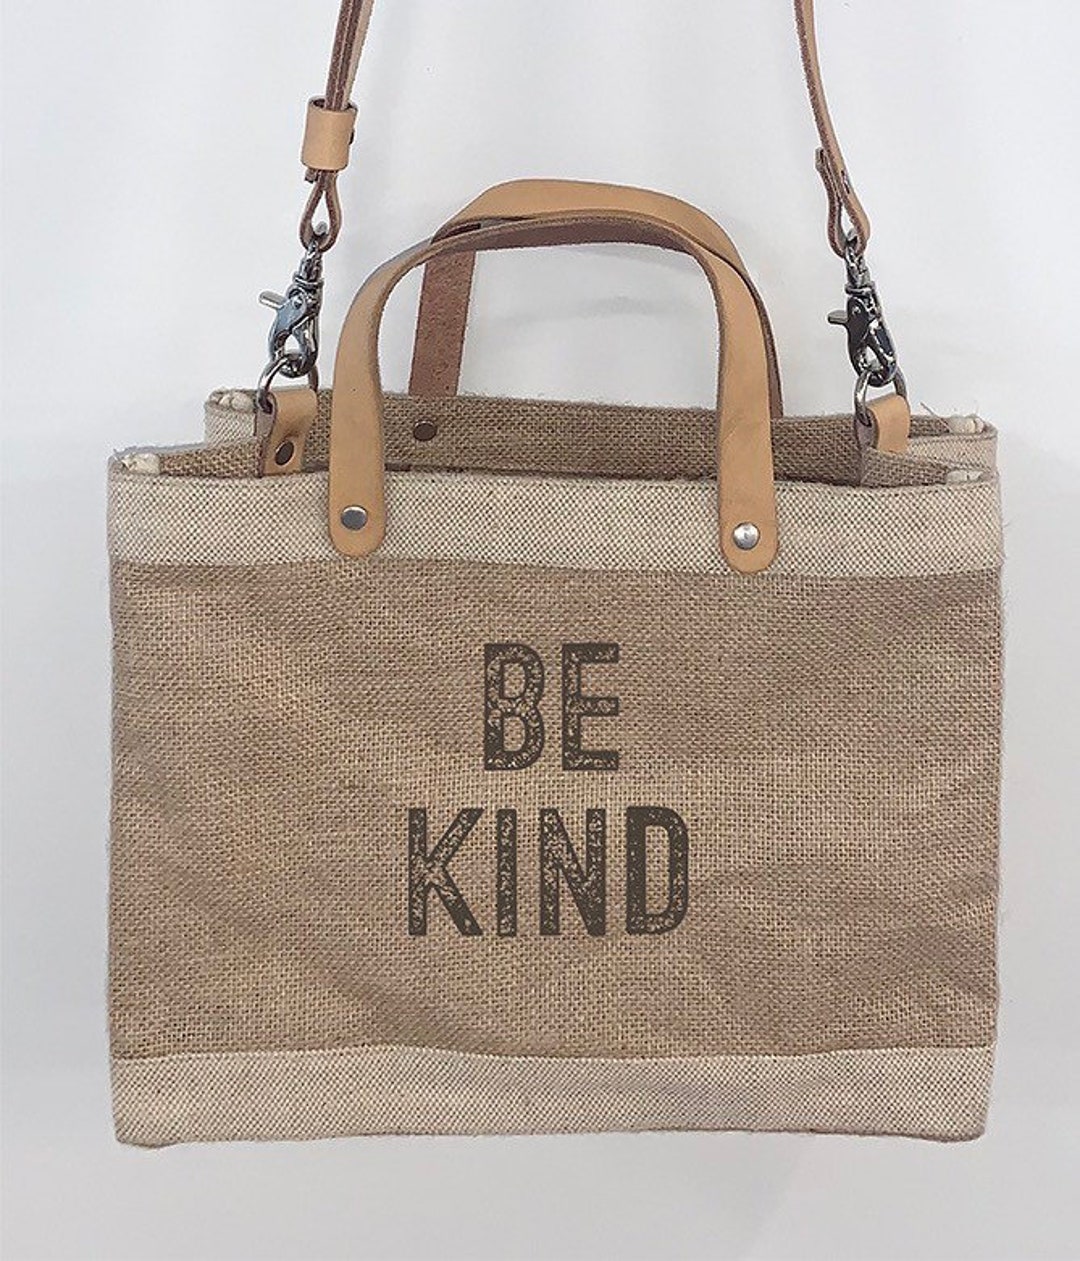 Be Kind Burlap Small Tote Bag With Leather Straps - Etsy